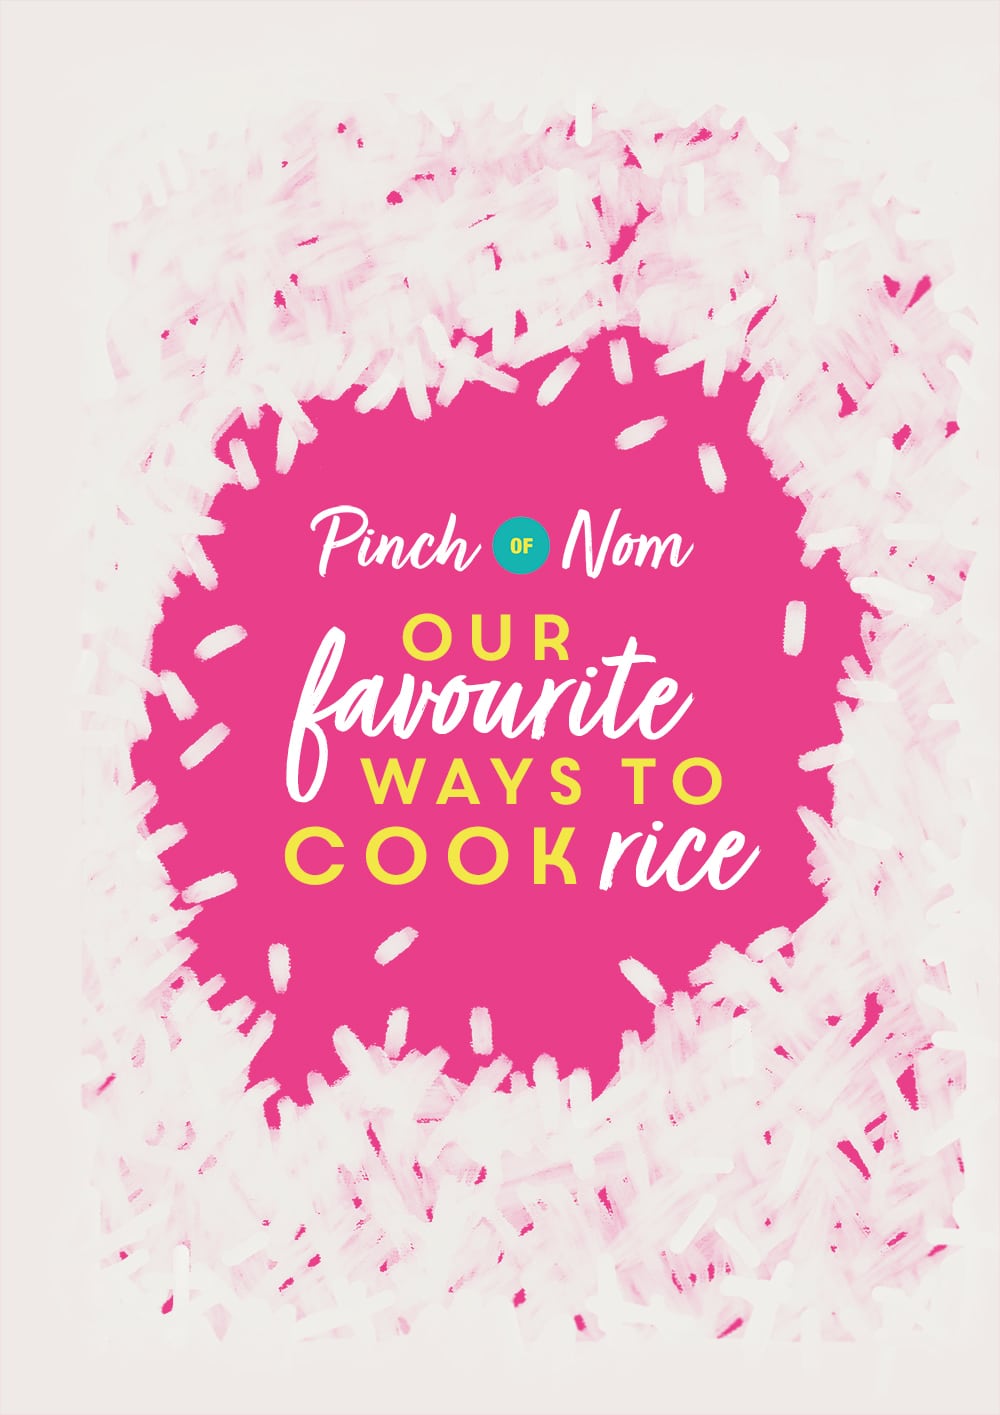 Our favourite ways to cook rice | Pinch of Nom Slimming Recipes